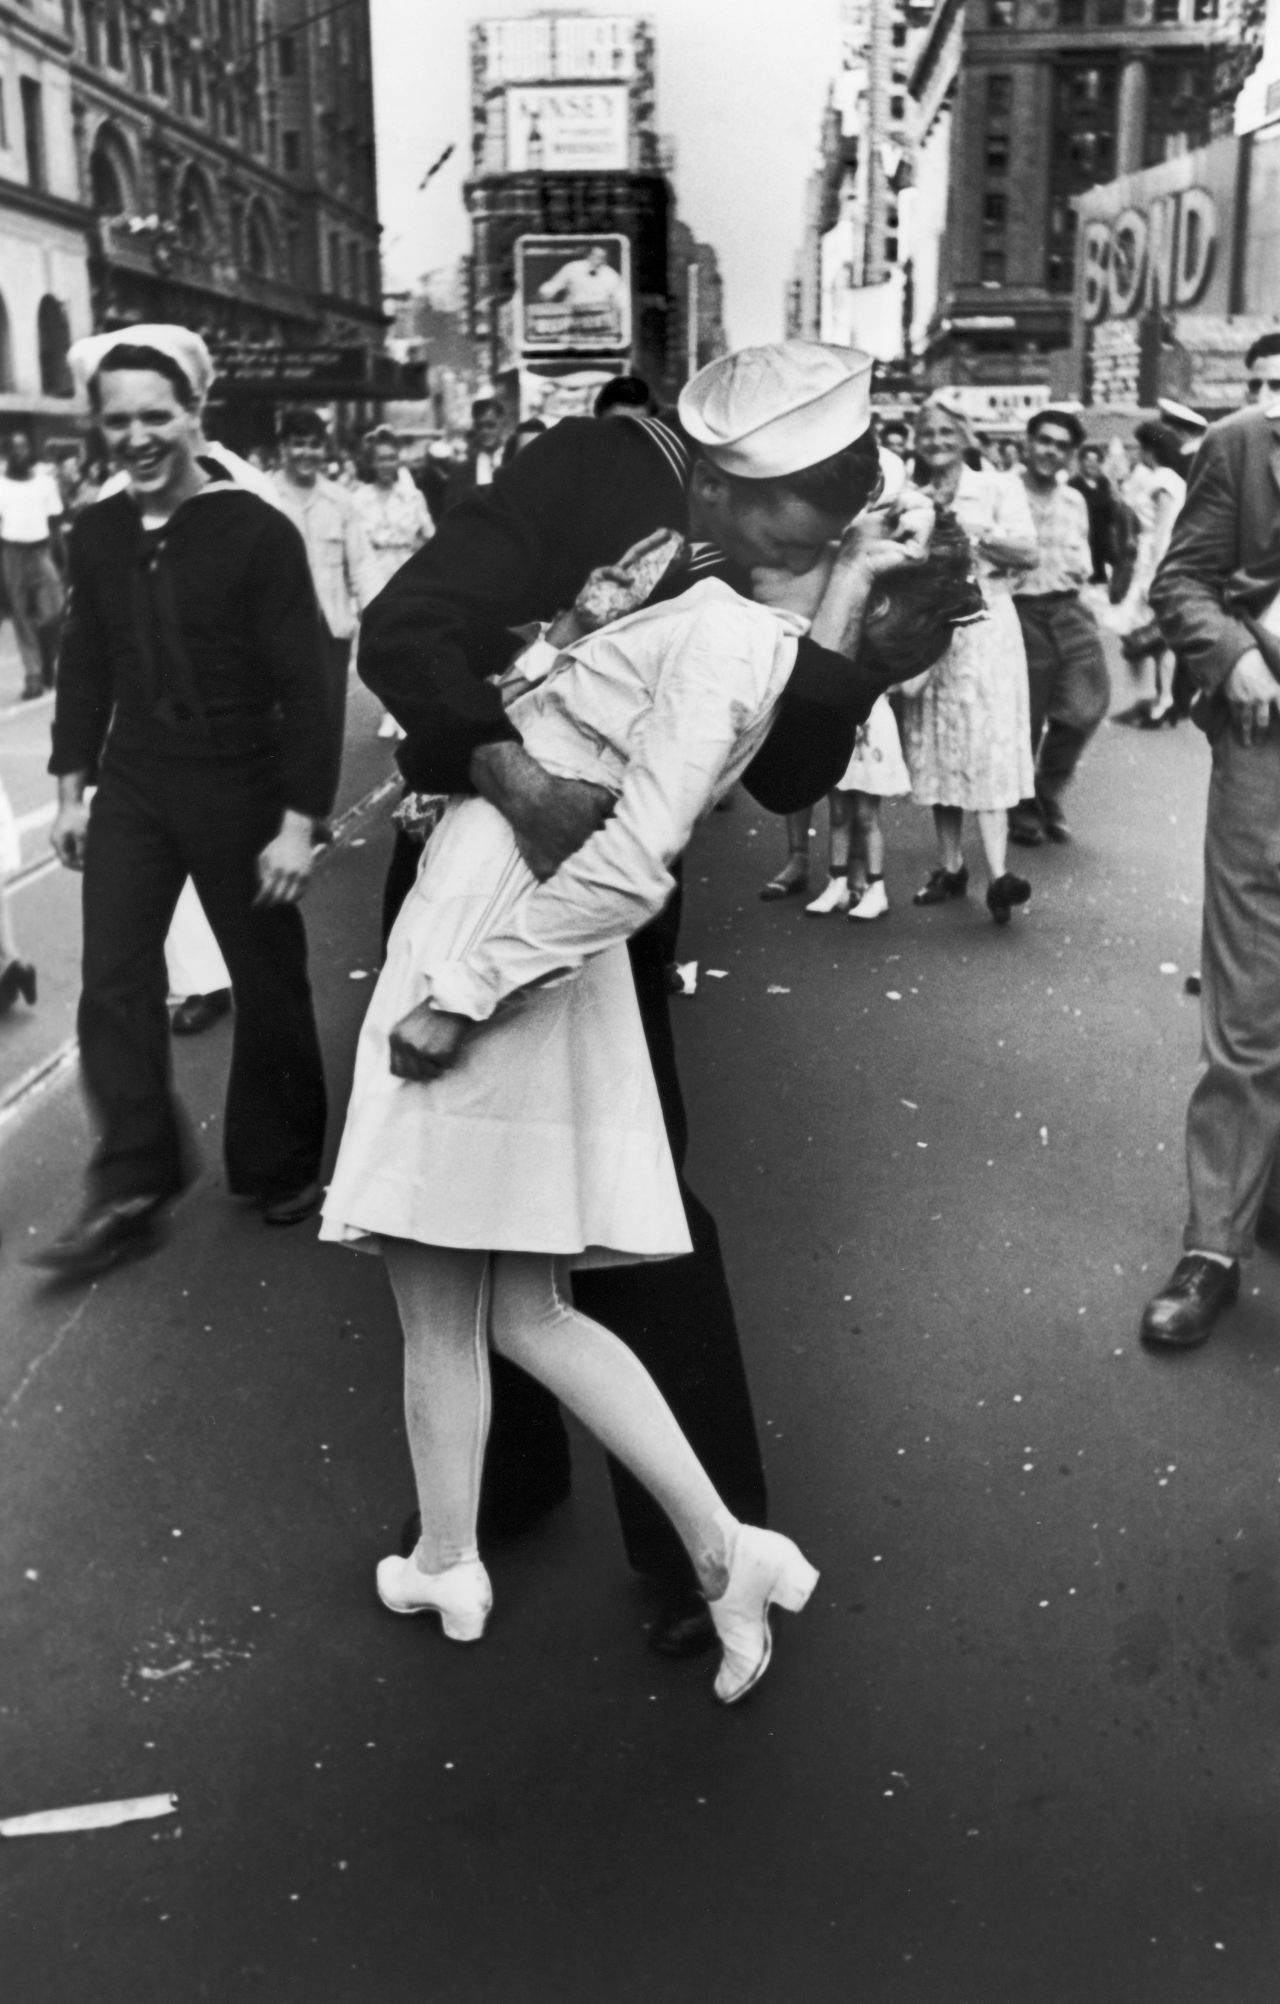 A jubilant American sailor kisses a nurse in New York's Times Square as he celebrates the news that Japan has surrendered.